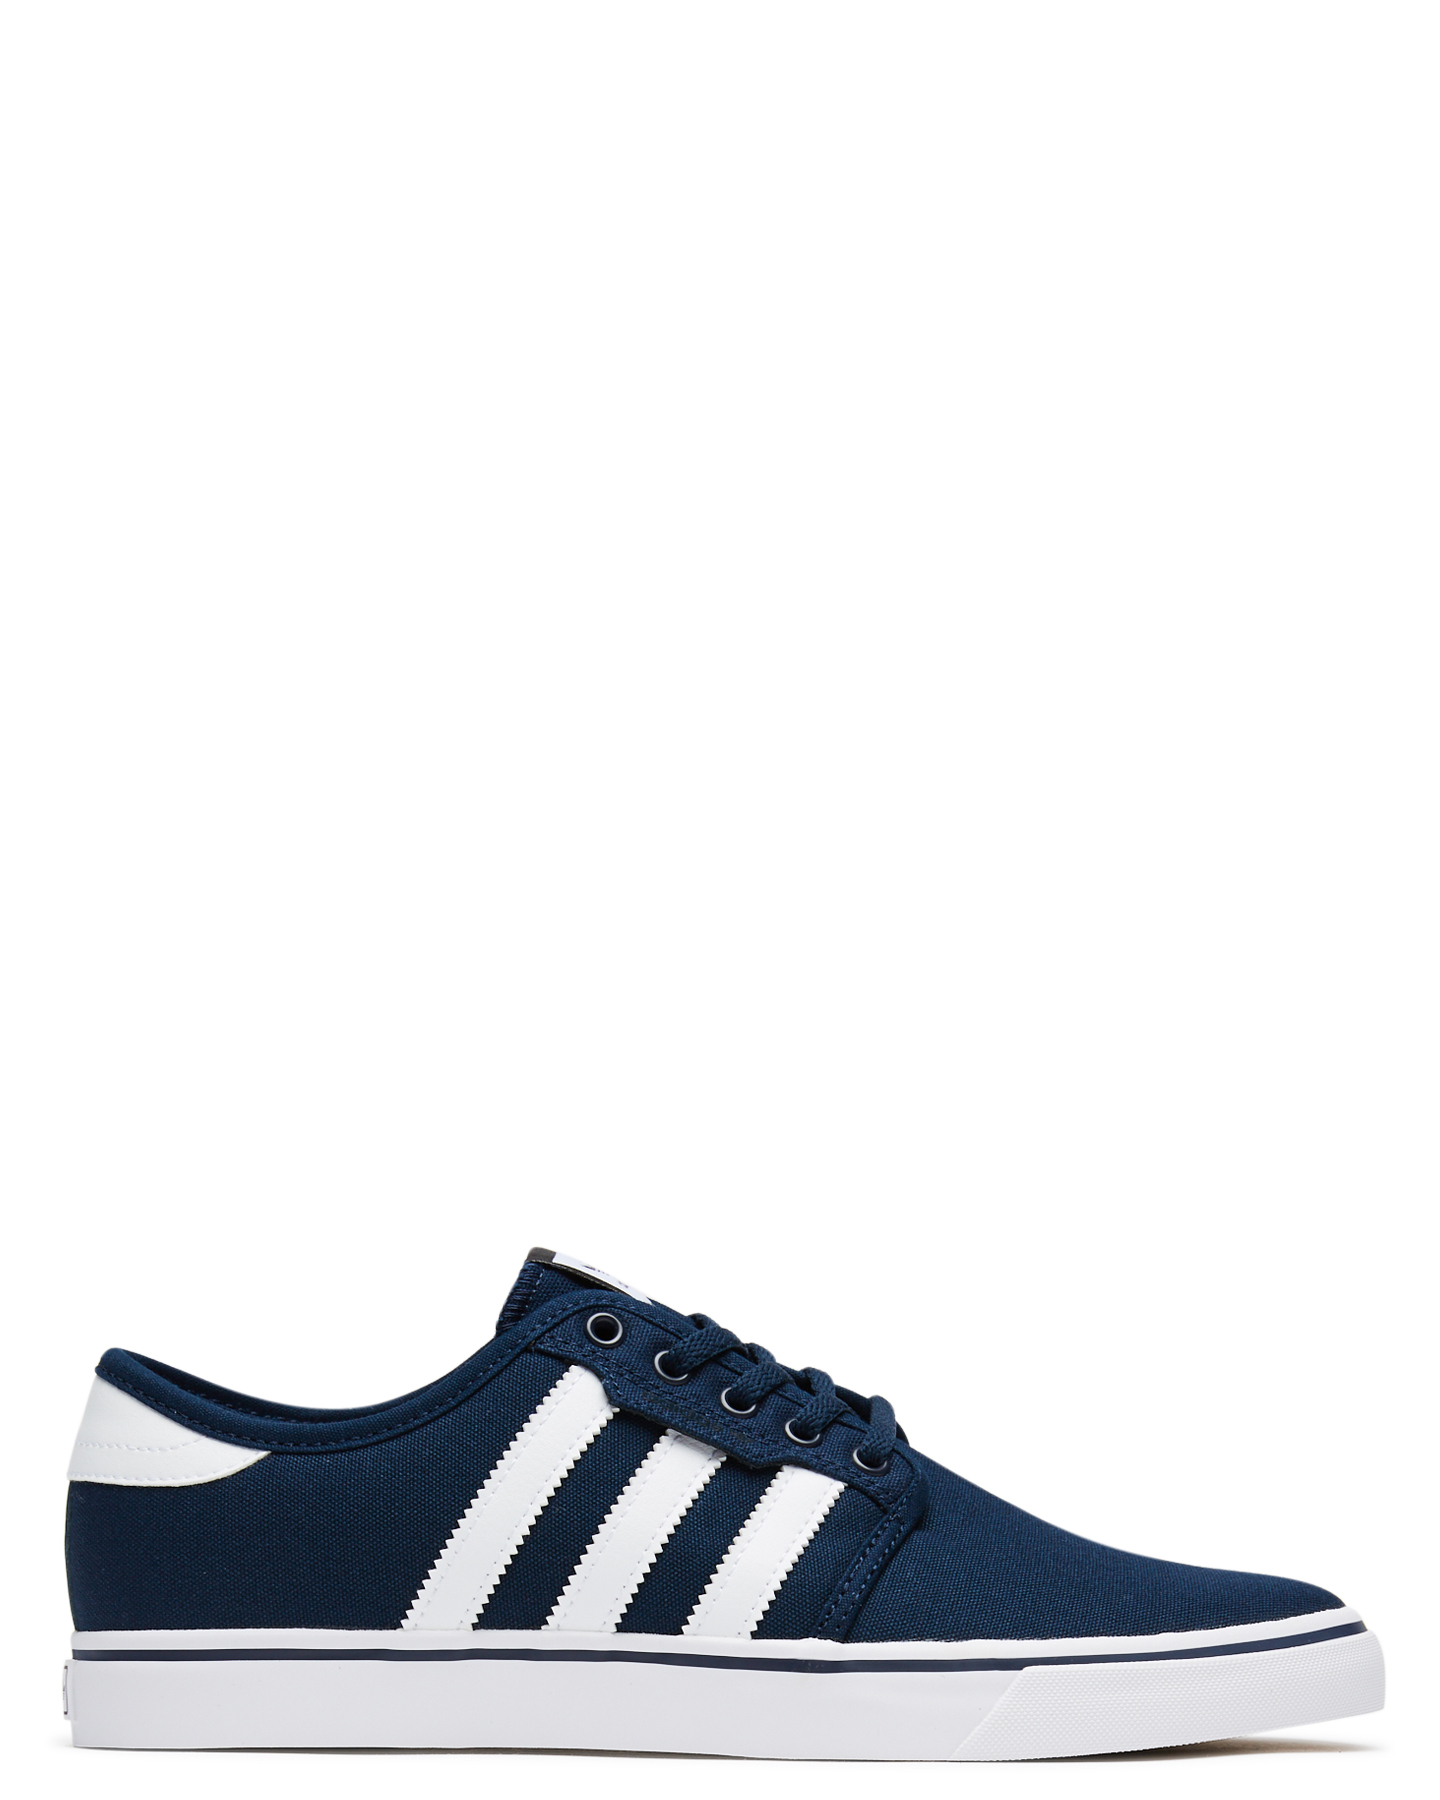 navy and white adidas shoes